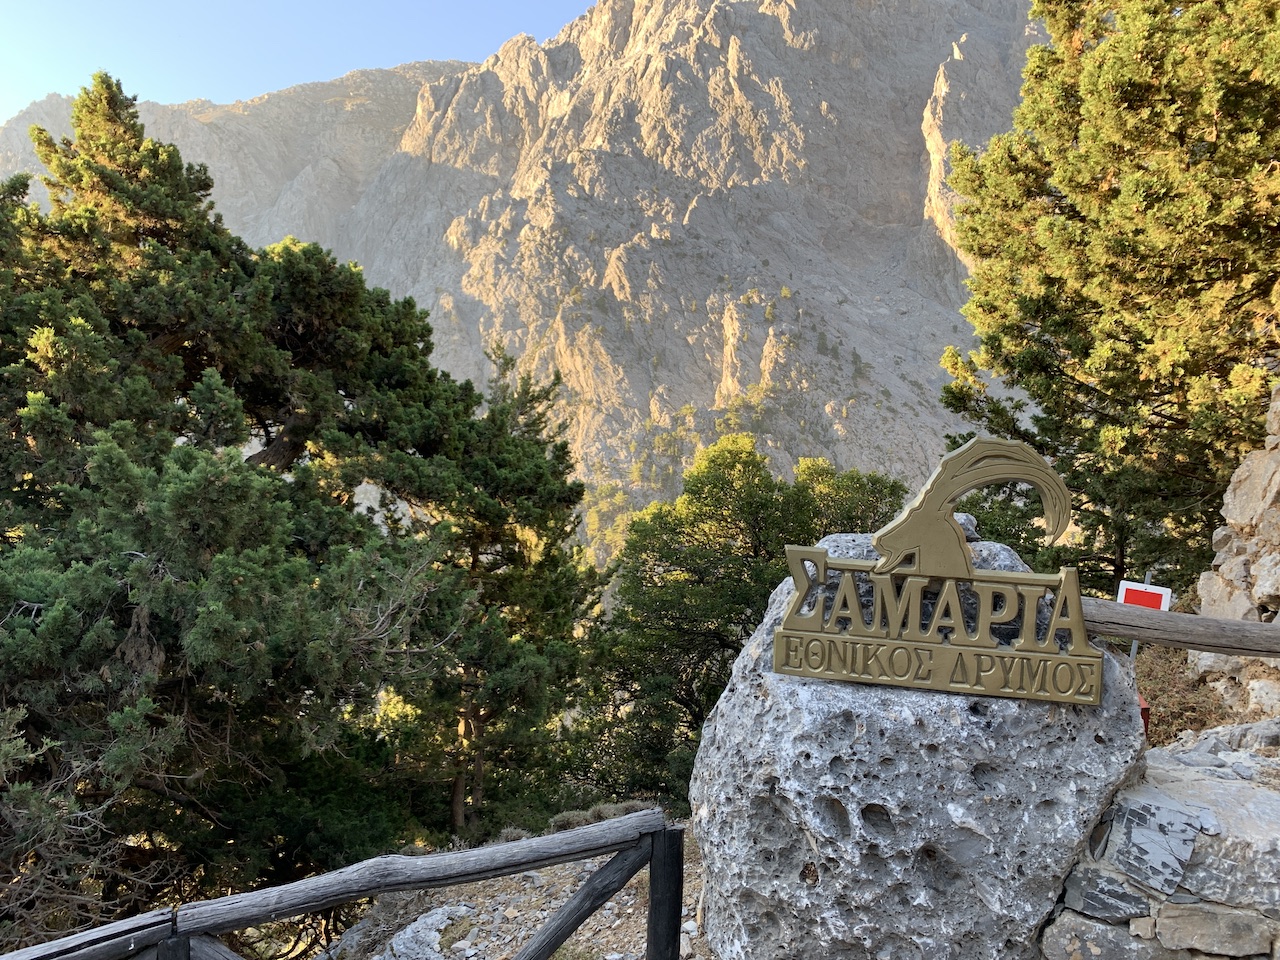 Samaria Canyon: The longest gorge in Europe